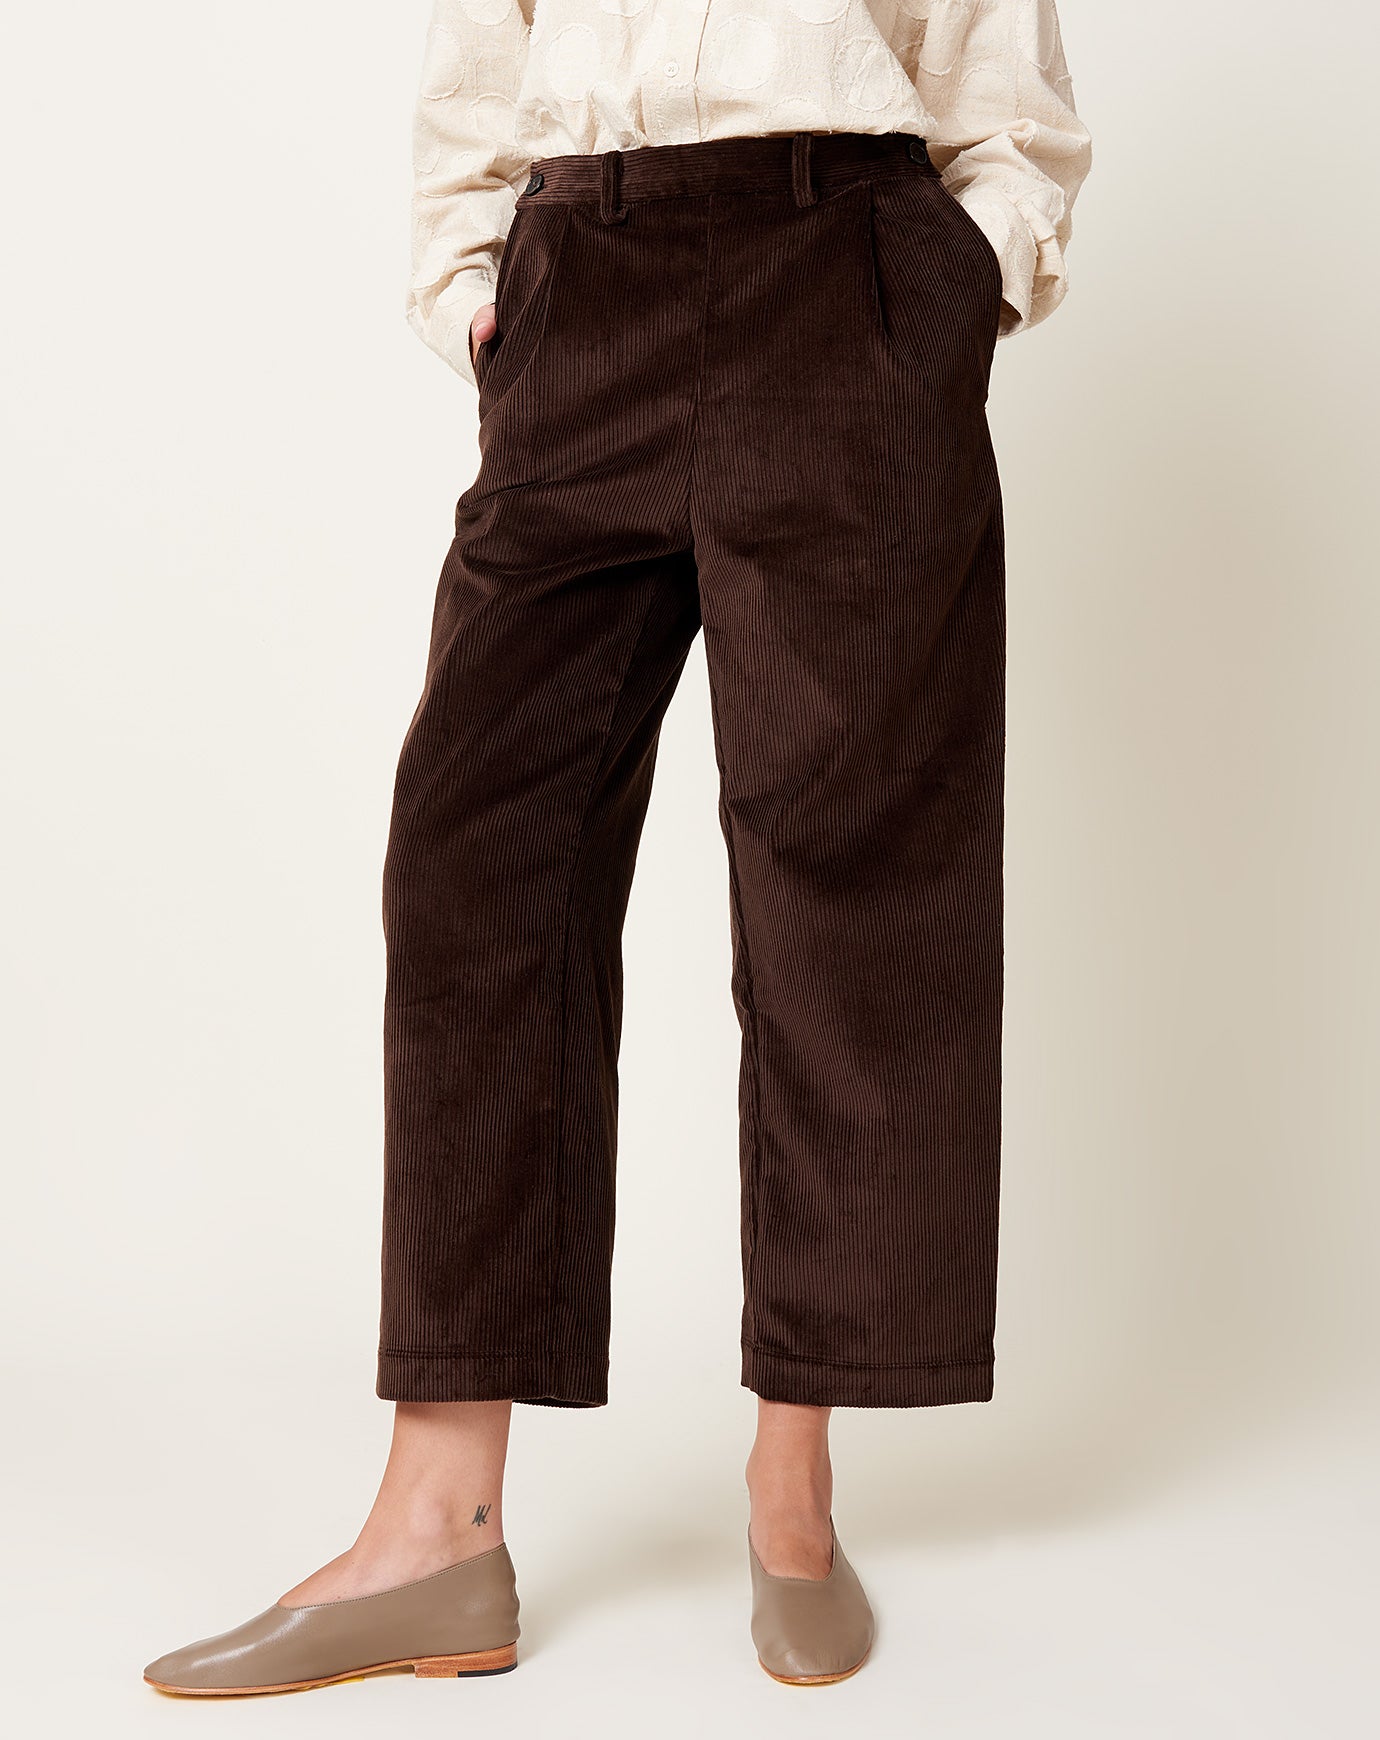 Cawley 8 Wale British Cord Sibyl Trouser in Chocolate